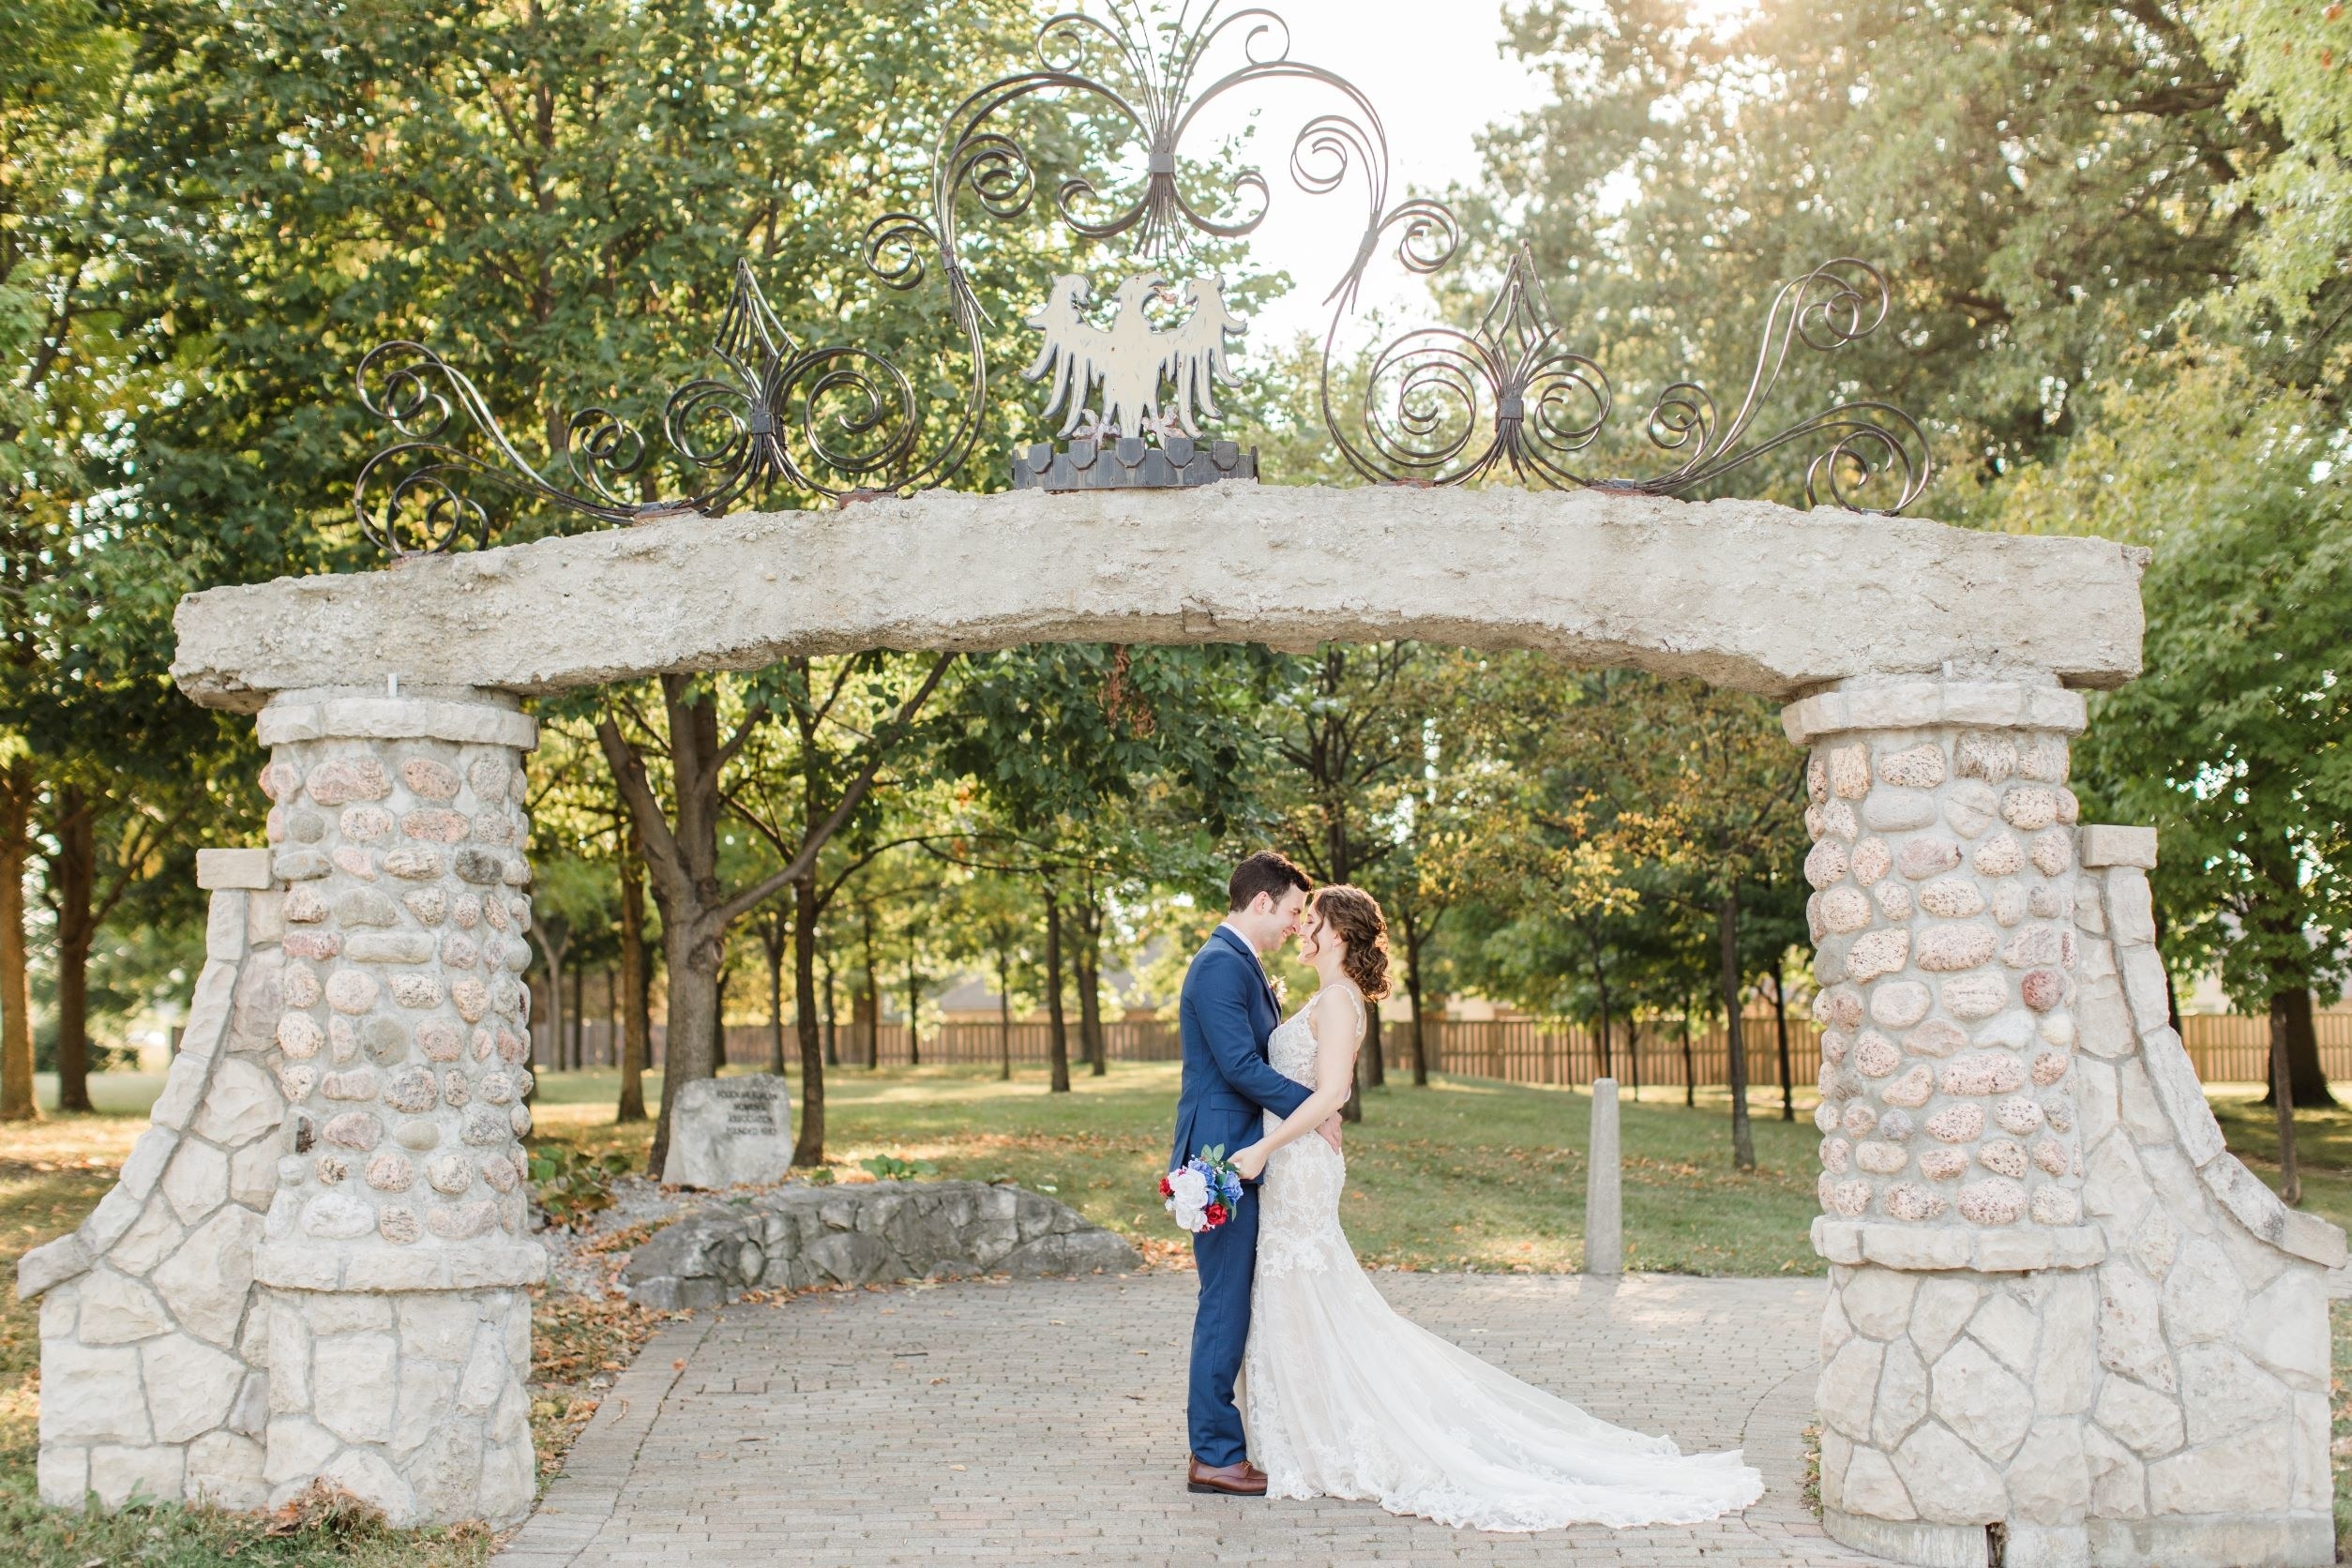 Bride and Groom embracing beneath a stone archway topped with a metal bird